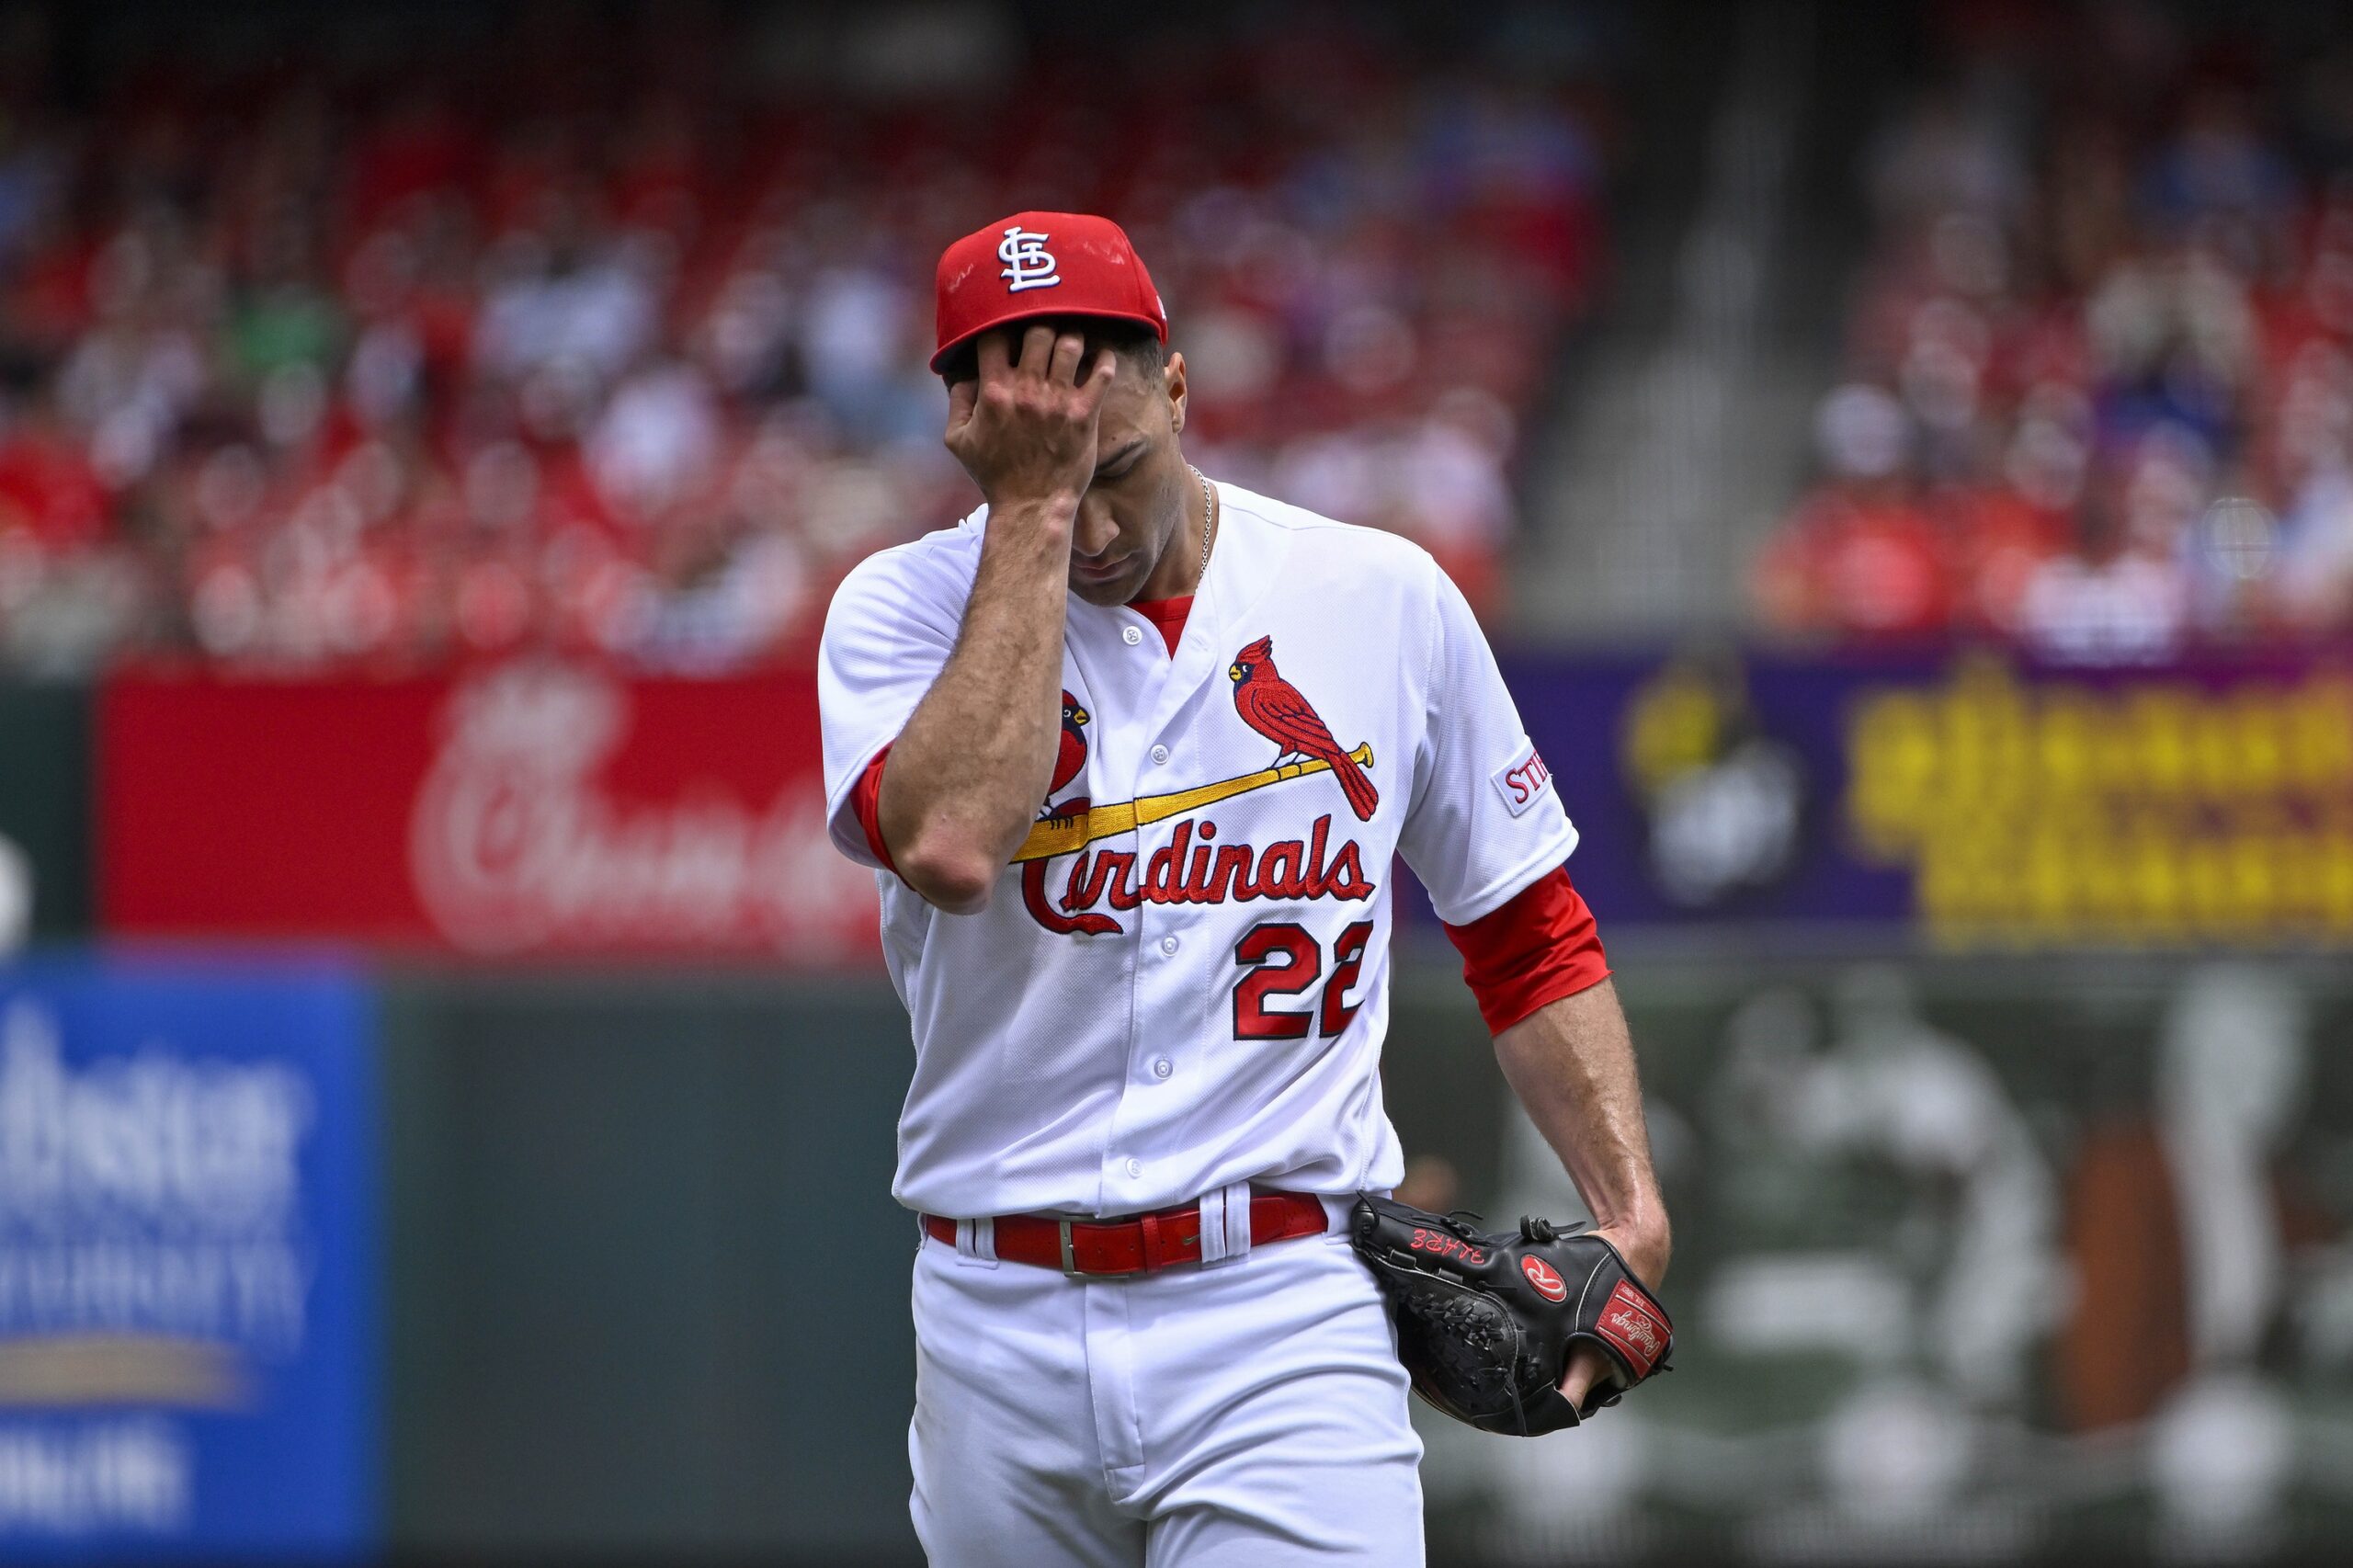 Bernies Redbird Review The Cardinals 10-22 Record Is The Direct Result Of Starting-Pitching Neglect.